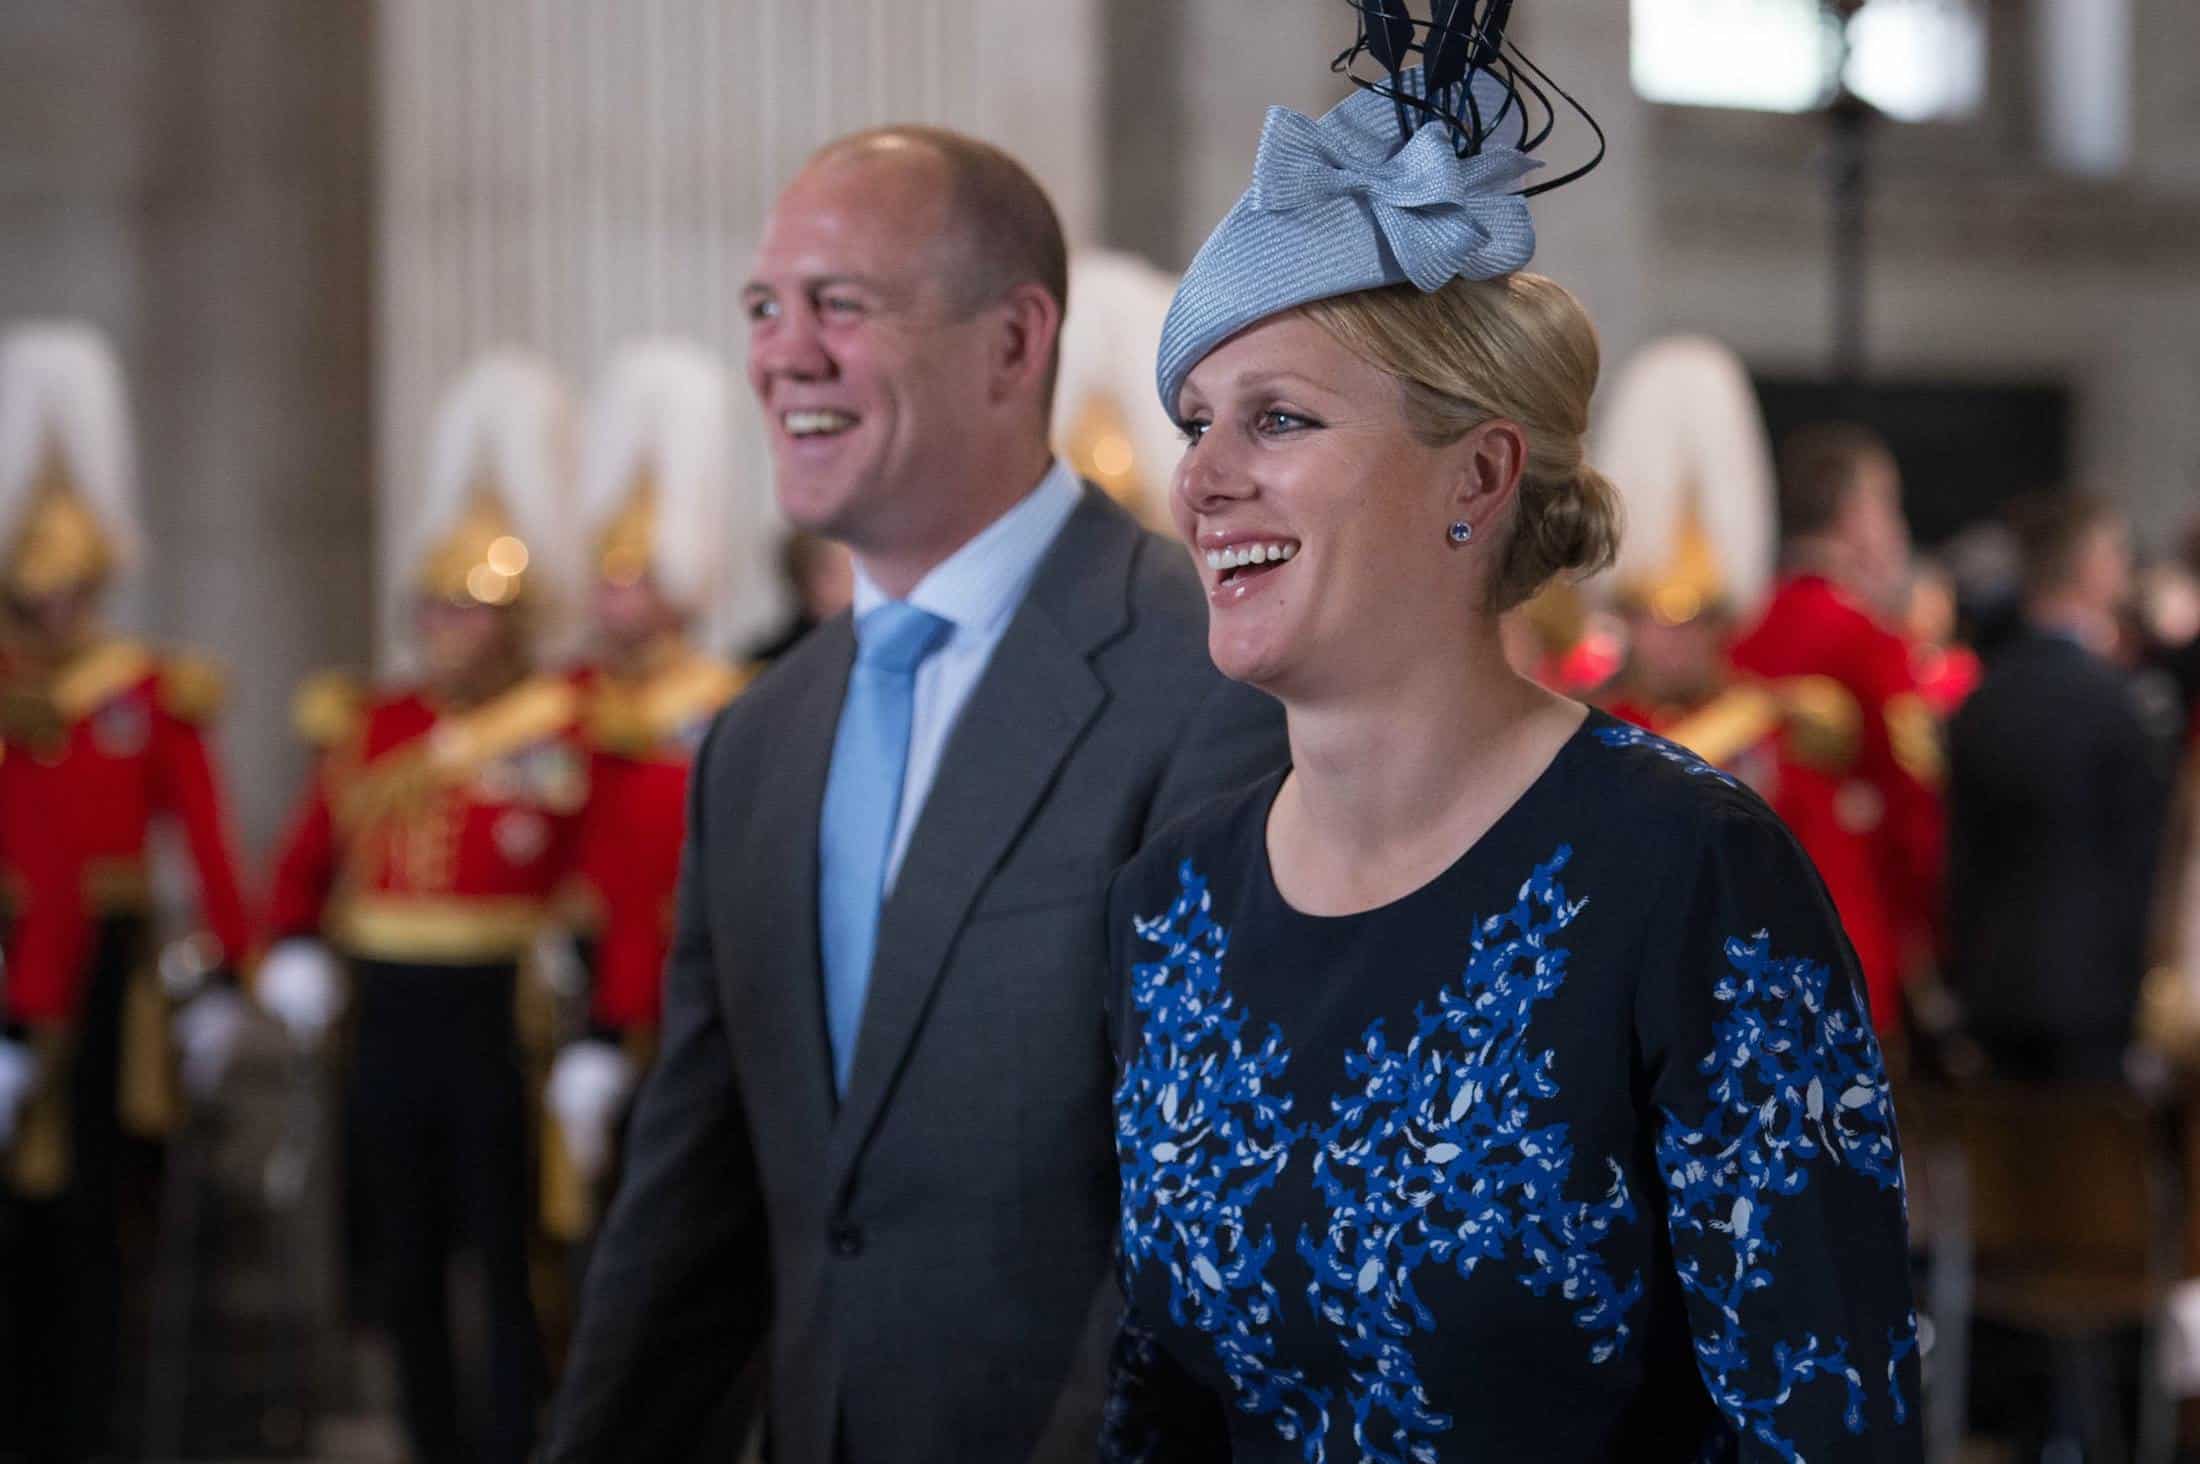 Claims Covid passport backed by Queen’s granddaughter Zara Tindall ‘could do harm’